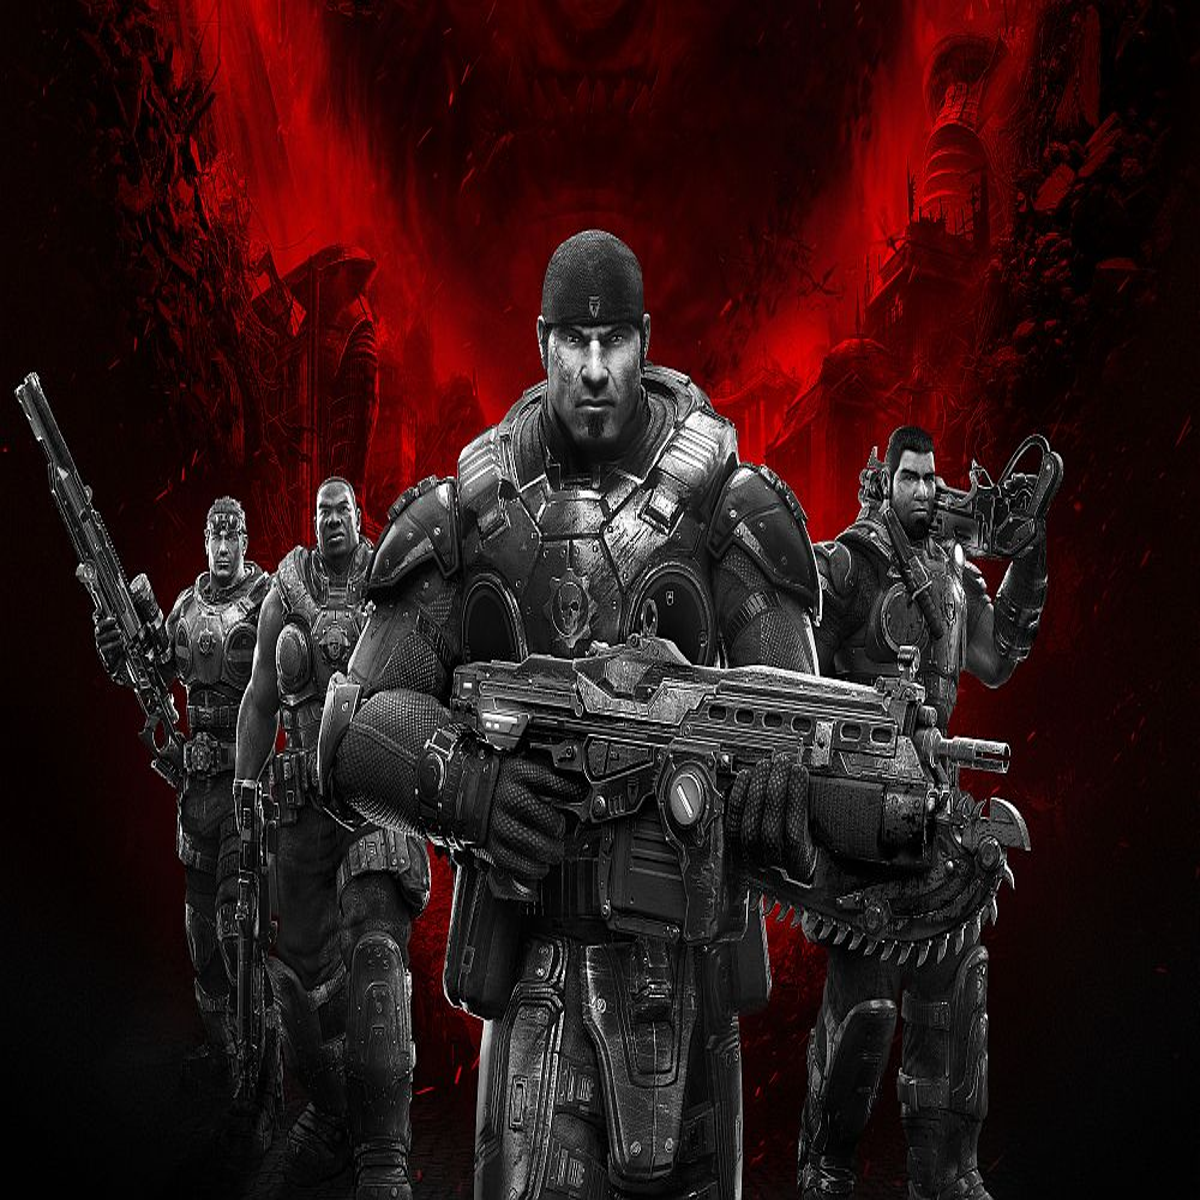 Gears of War: Ultimate Edition file size and achievements revealed